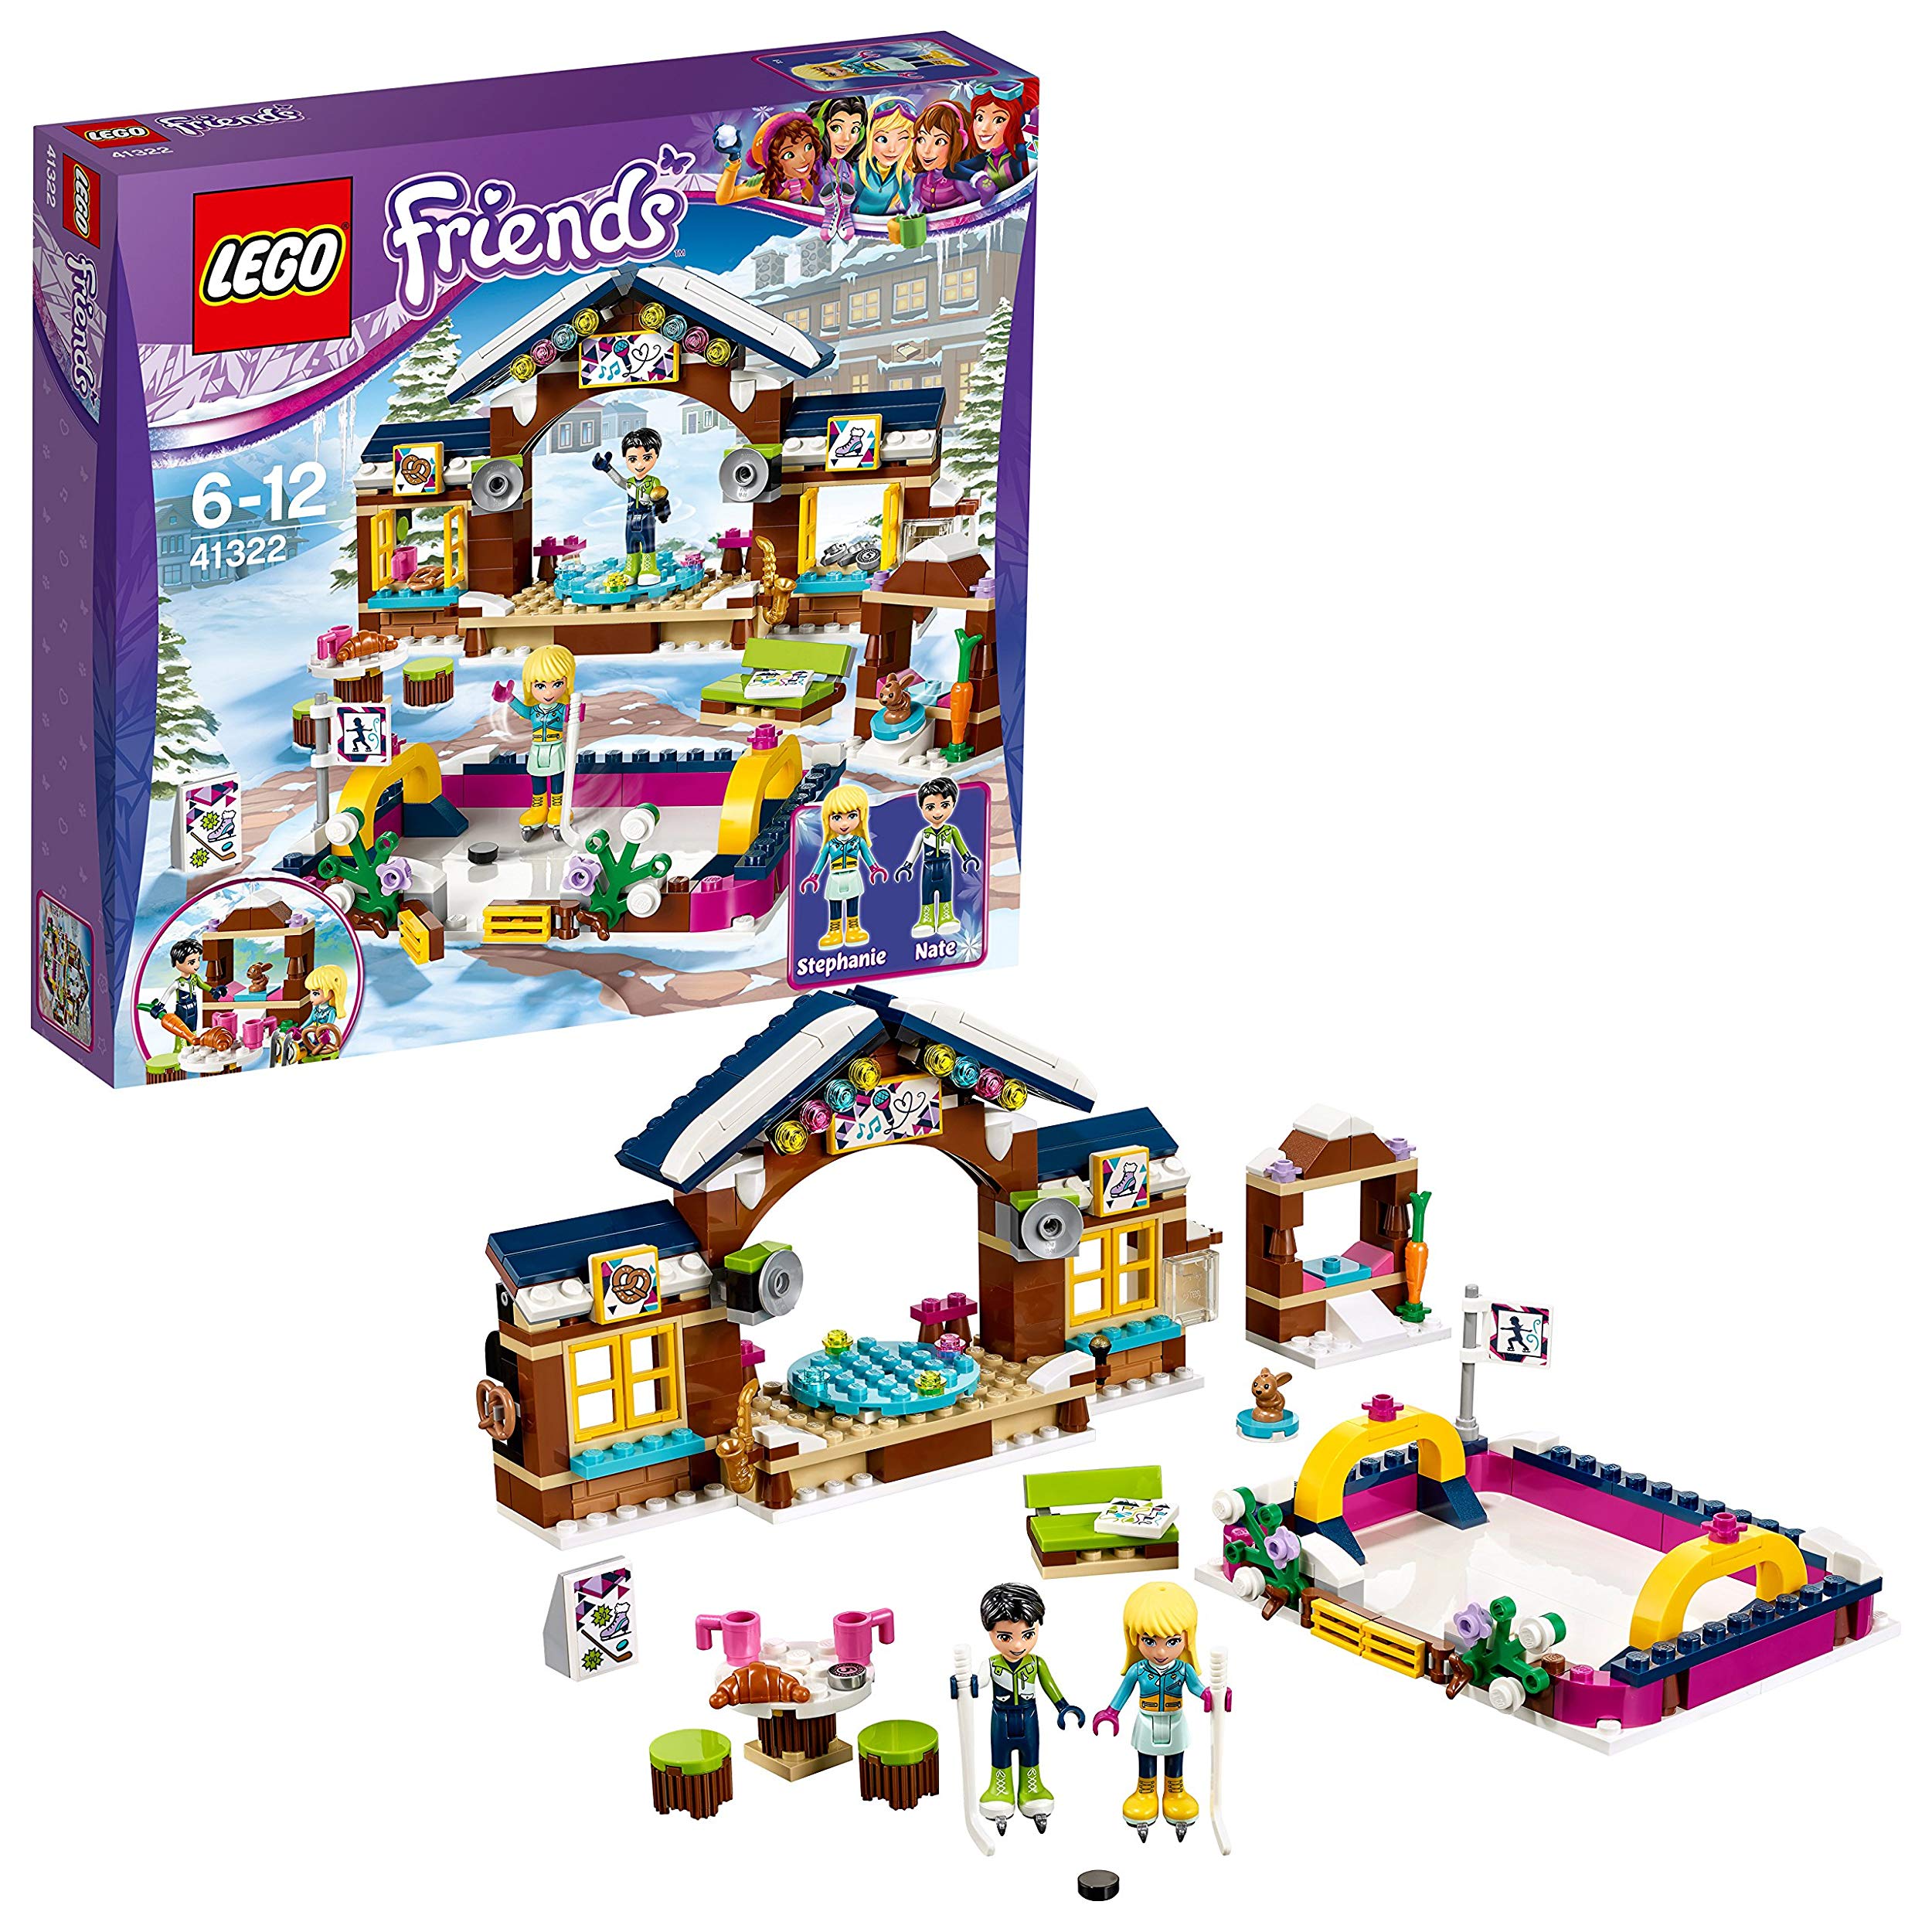 Lego Friends Skating Winter Sports Space Place